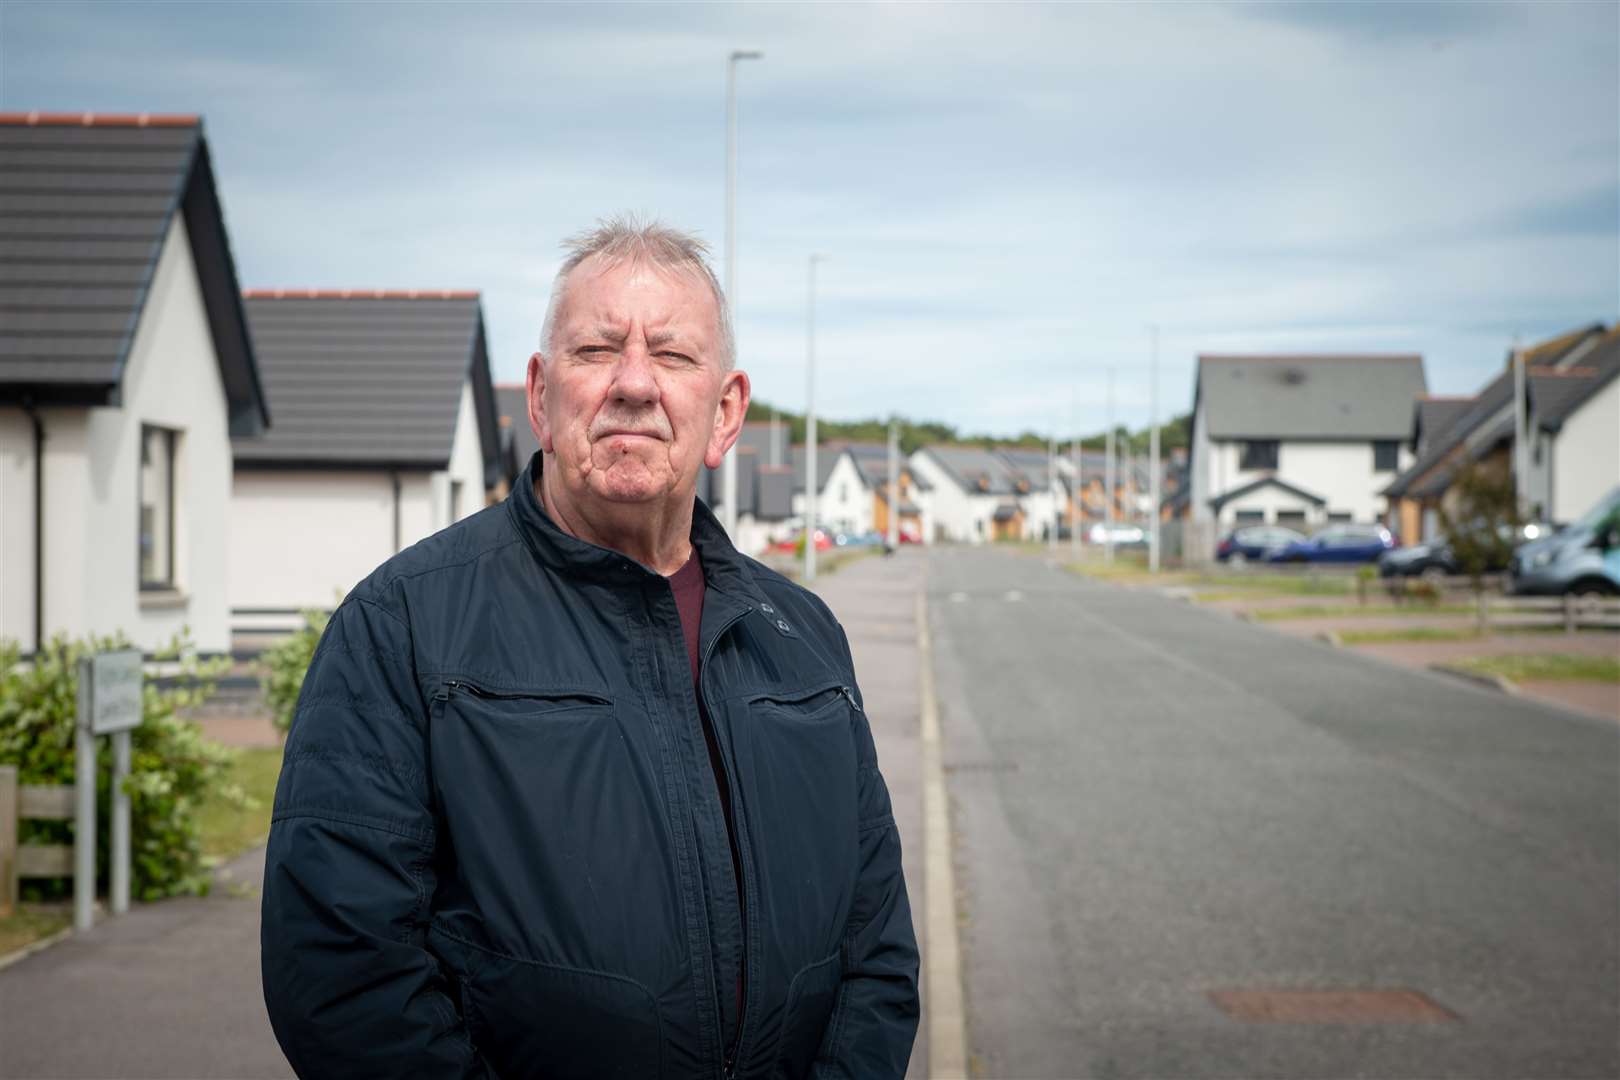 David Mackay is calling for a better bus service for the Lochloy housing estate in Nairn.